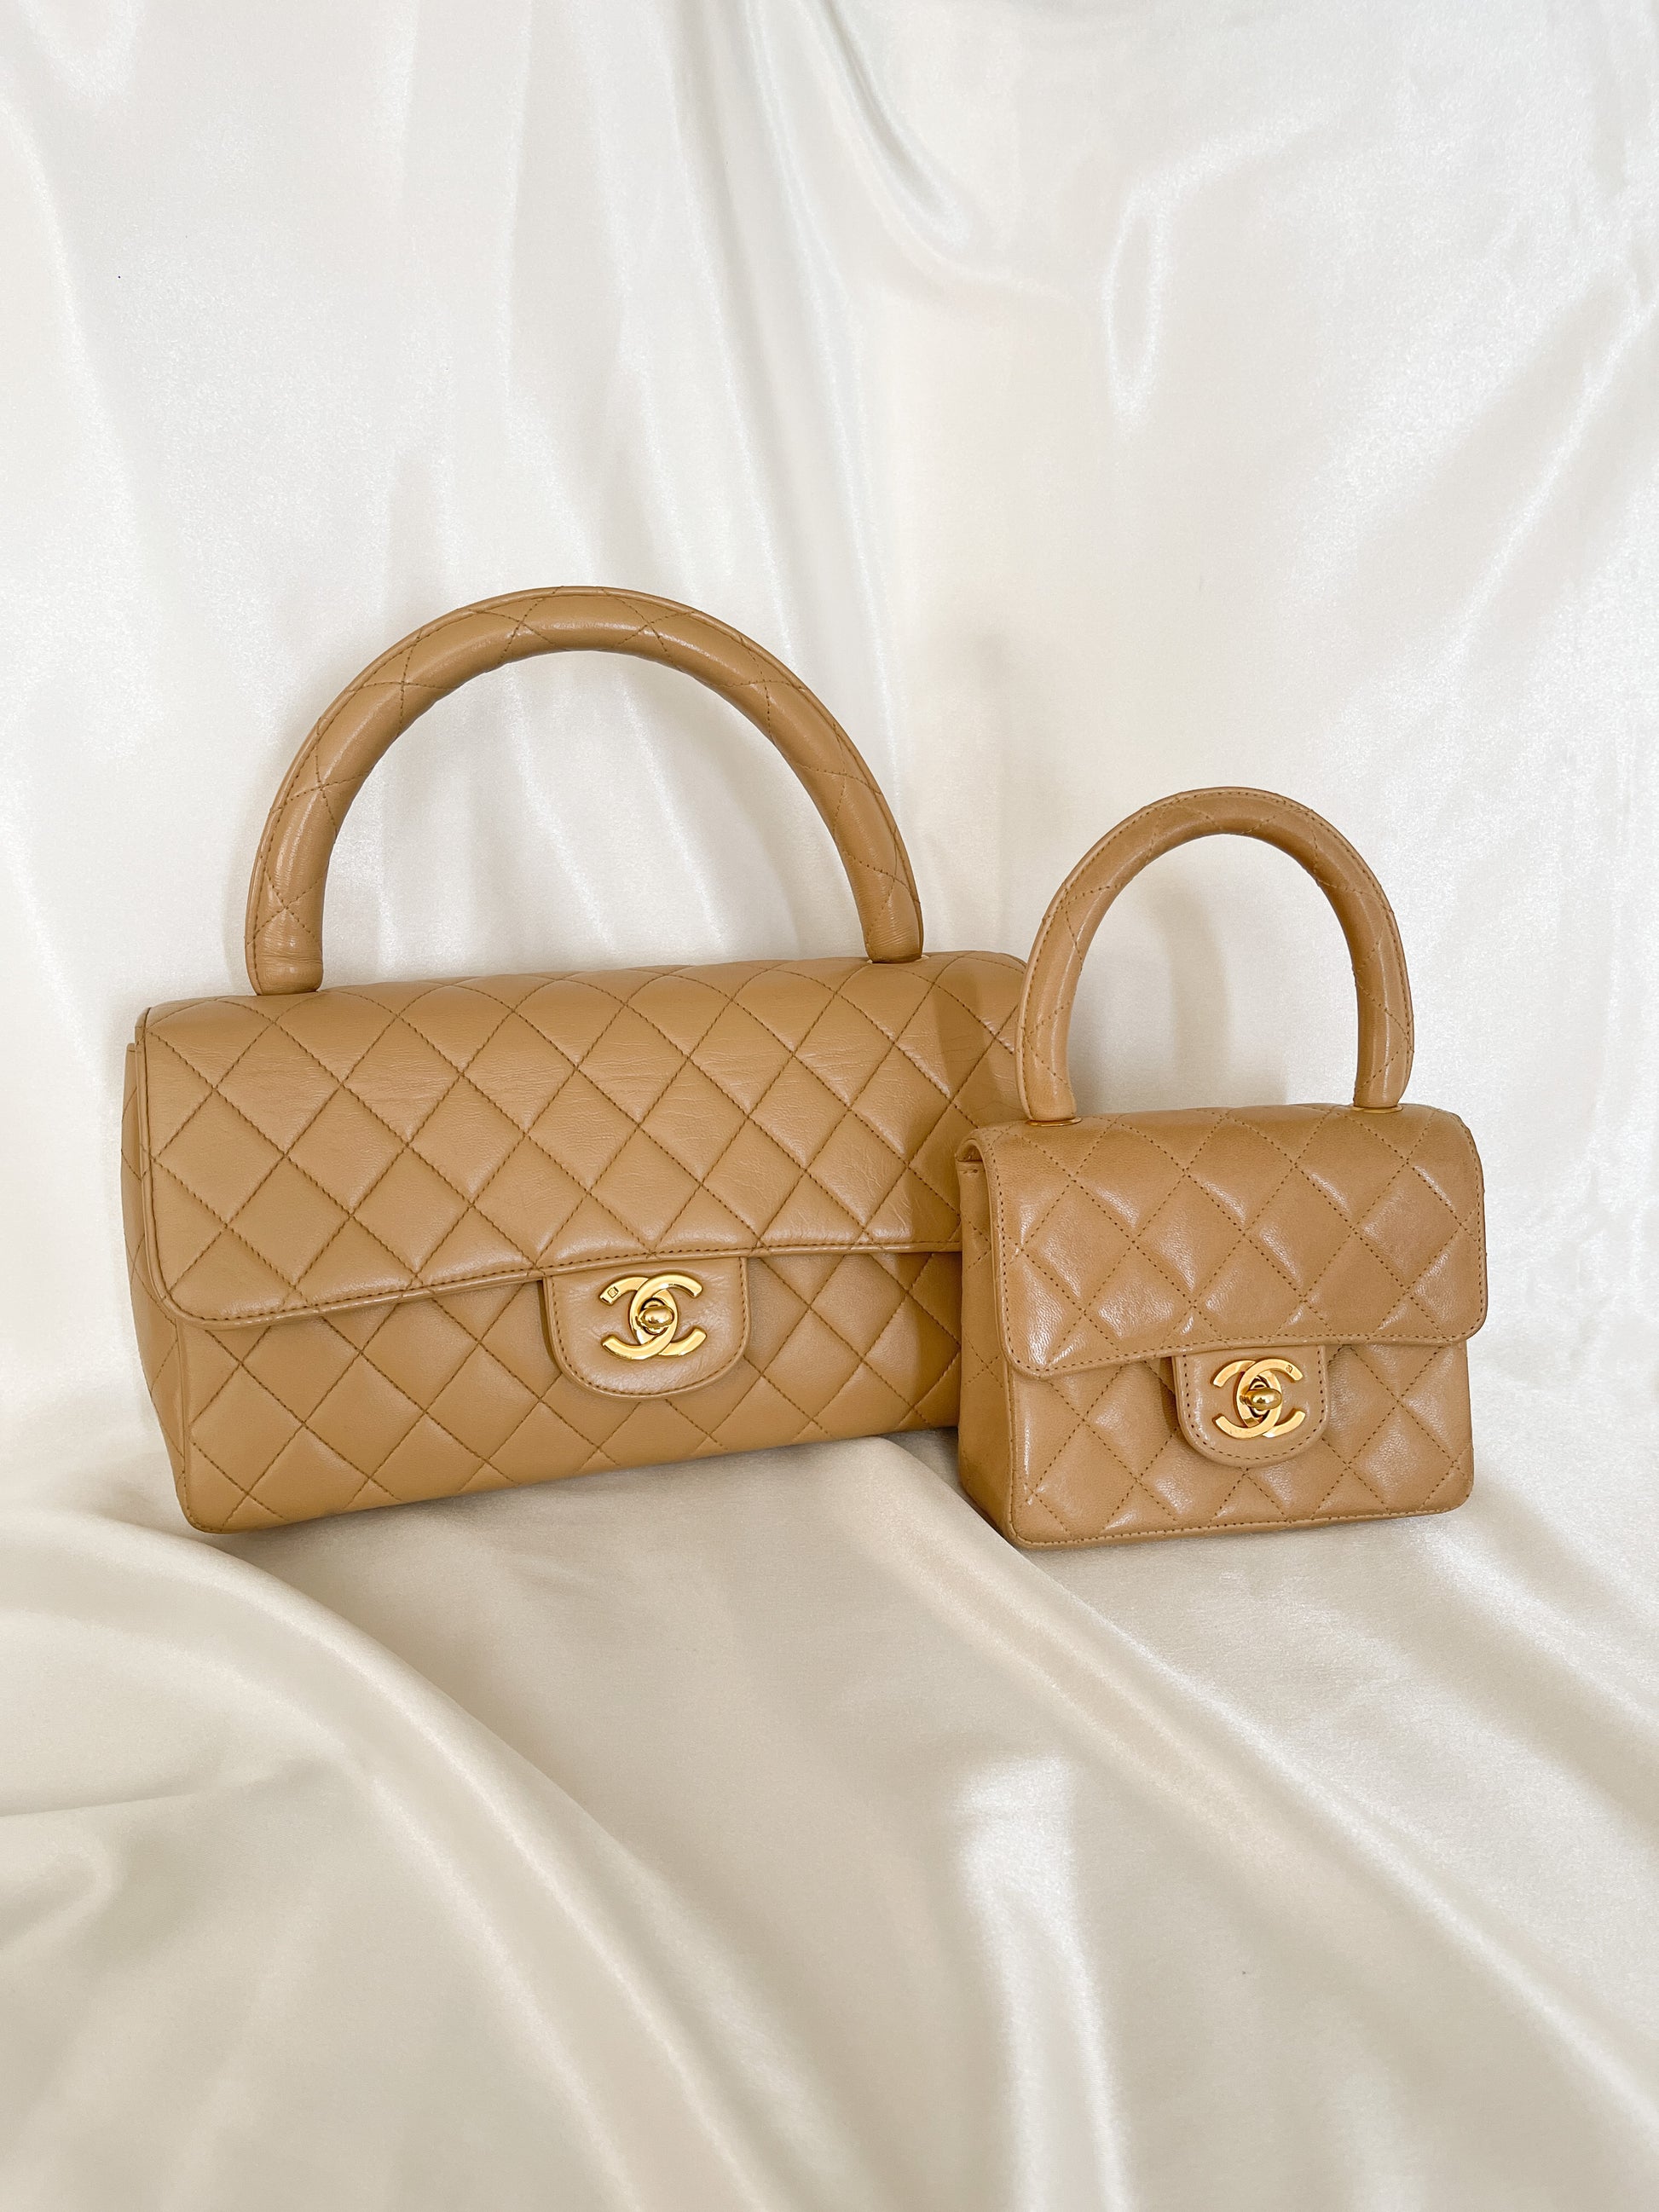 Chanel - Authenticated Coco Handle Handbag - Leather Beige Plain for Women, Very Good Condition